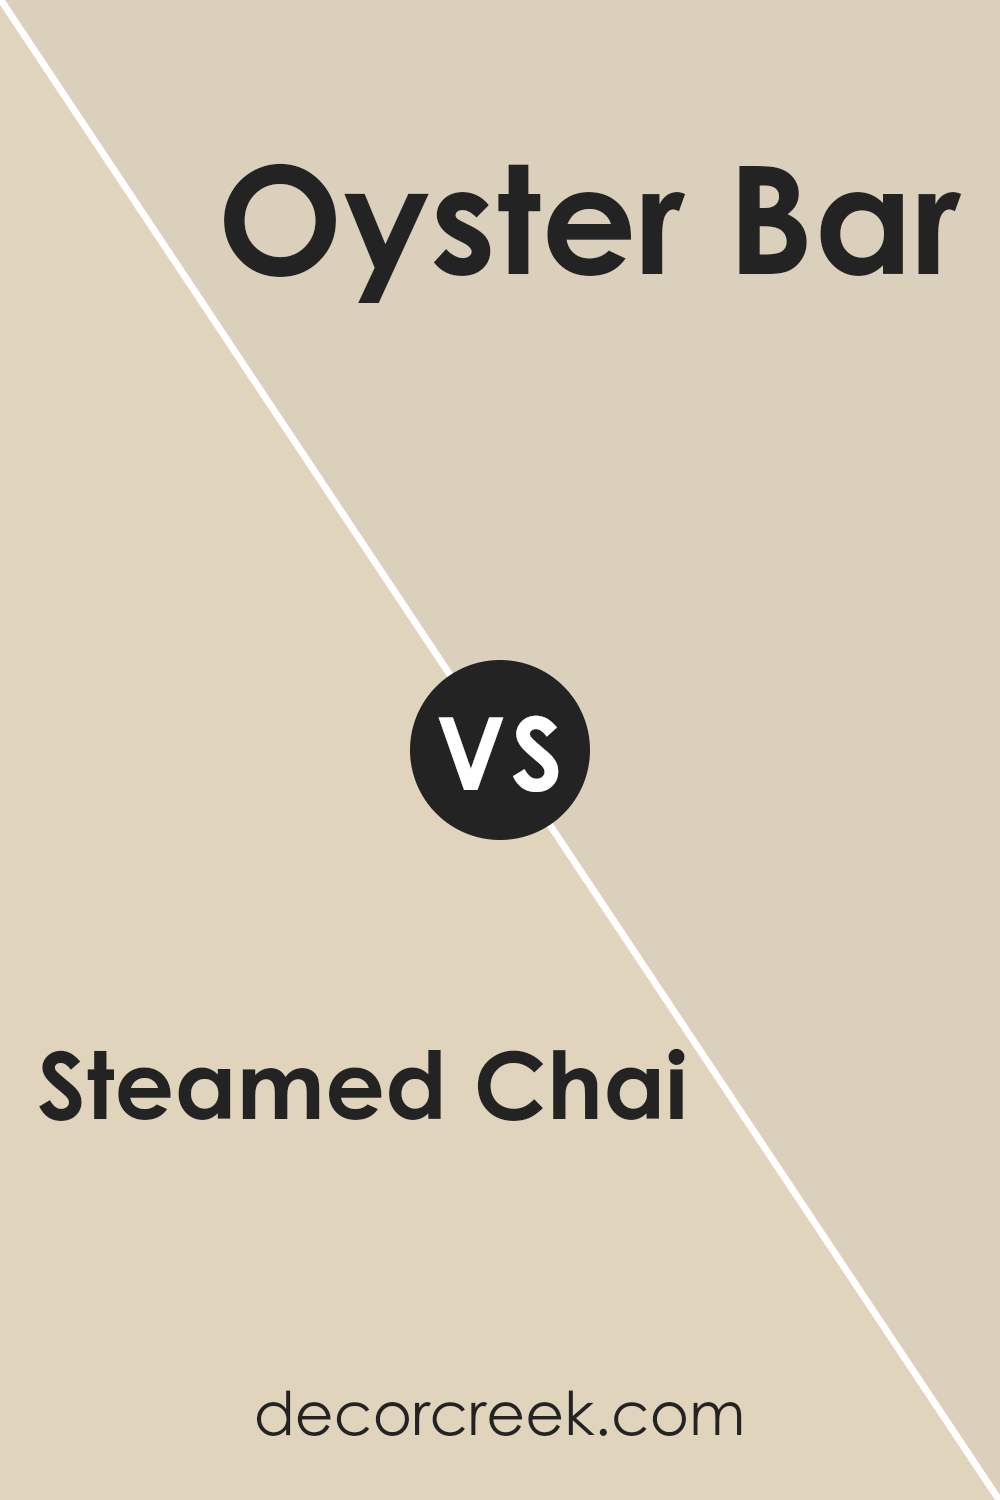 steamed_chai_sw_9509_vs_oyster_bar_sw_7565